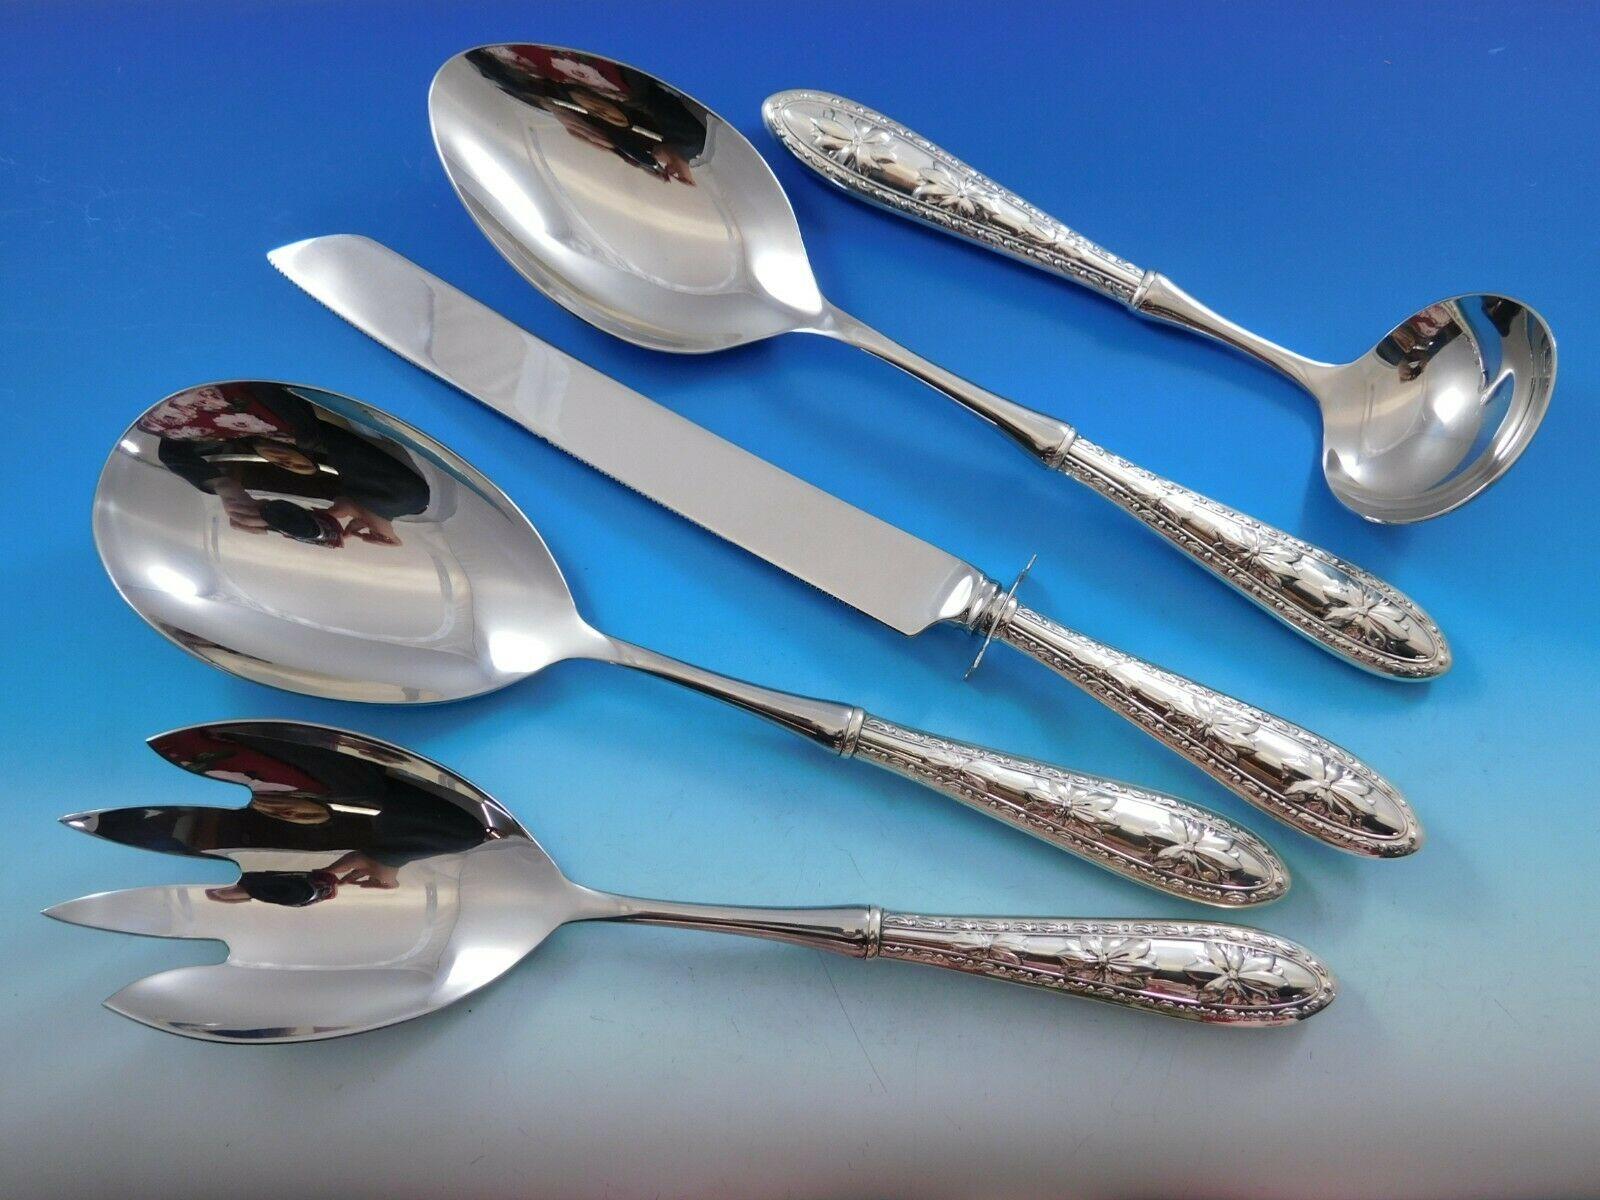 Poinsettia by Wallace 5-piece holiday serving set. The versatile serving pieces make holiday entertaining a breeze. All of these pieces have sterling silver hollow handles with stainless implements, all are original Wallace pieces. This set